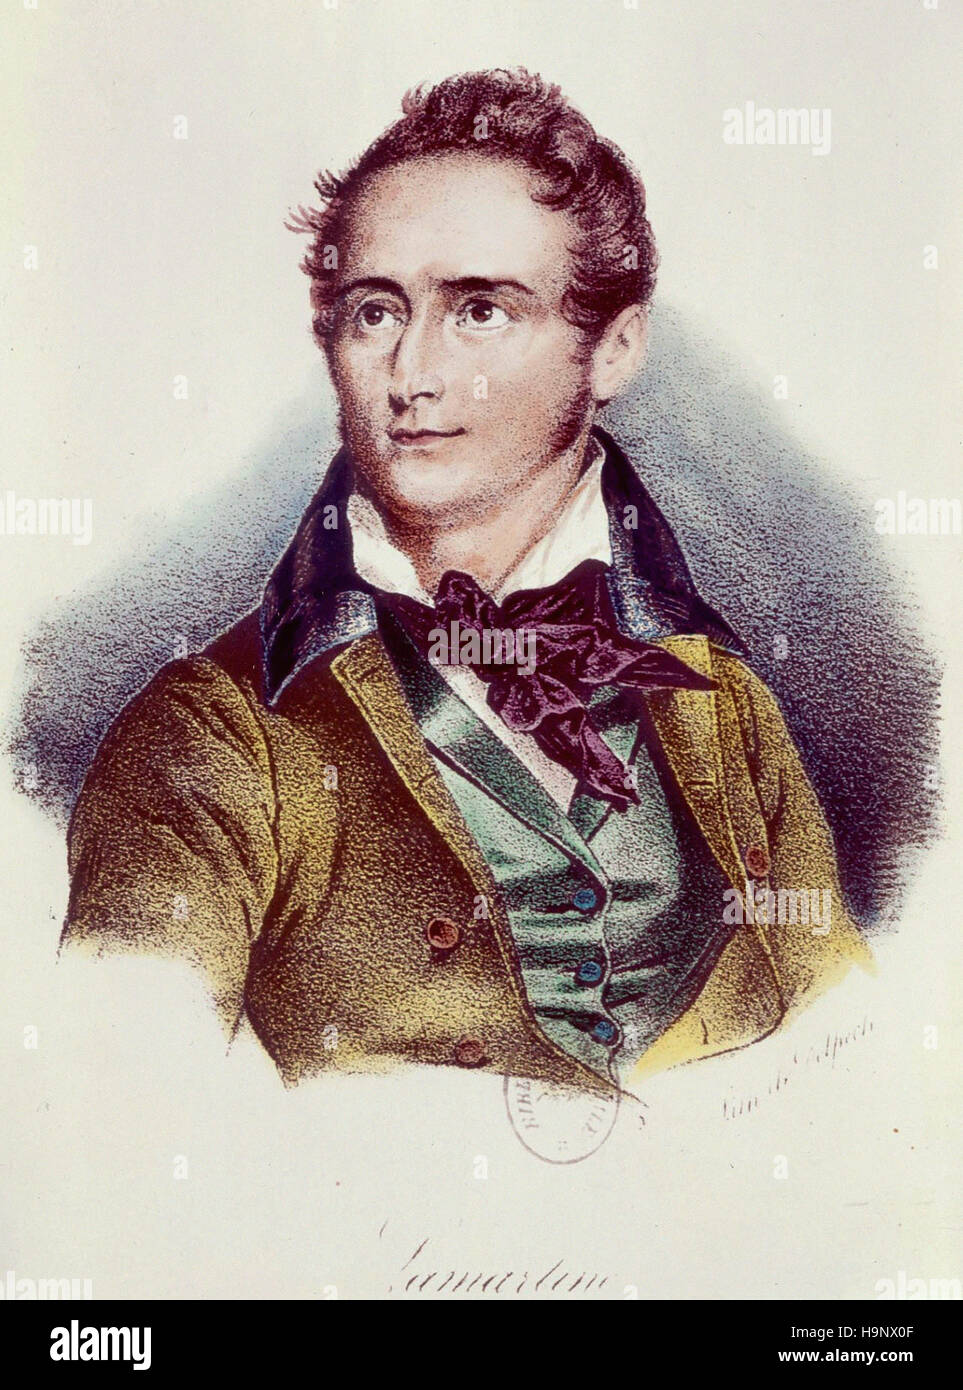 Alphonse de lamartine french writer hi-res stock photography and images - Alamy